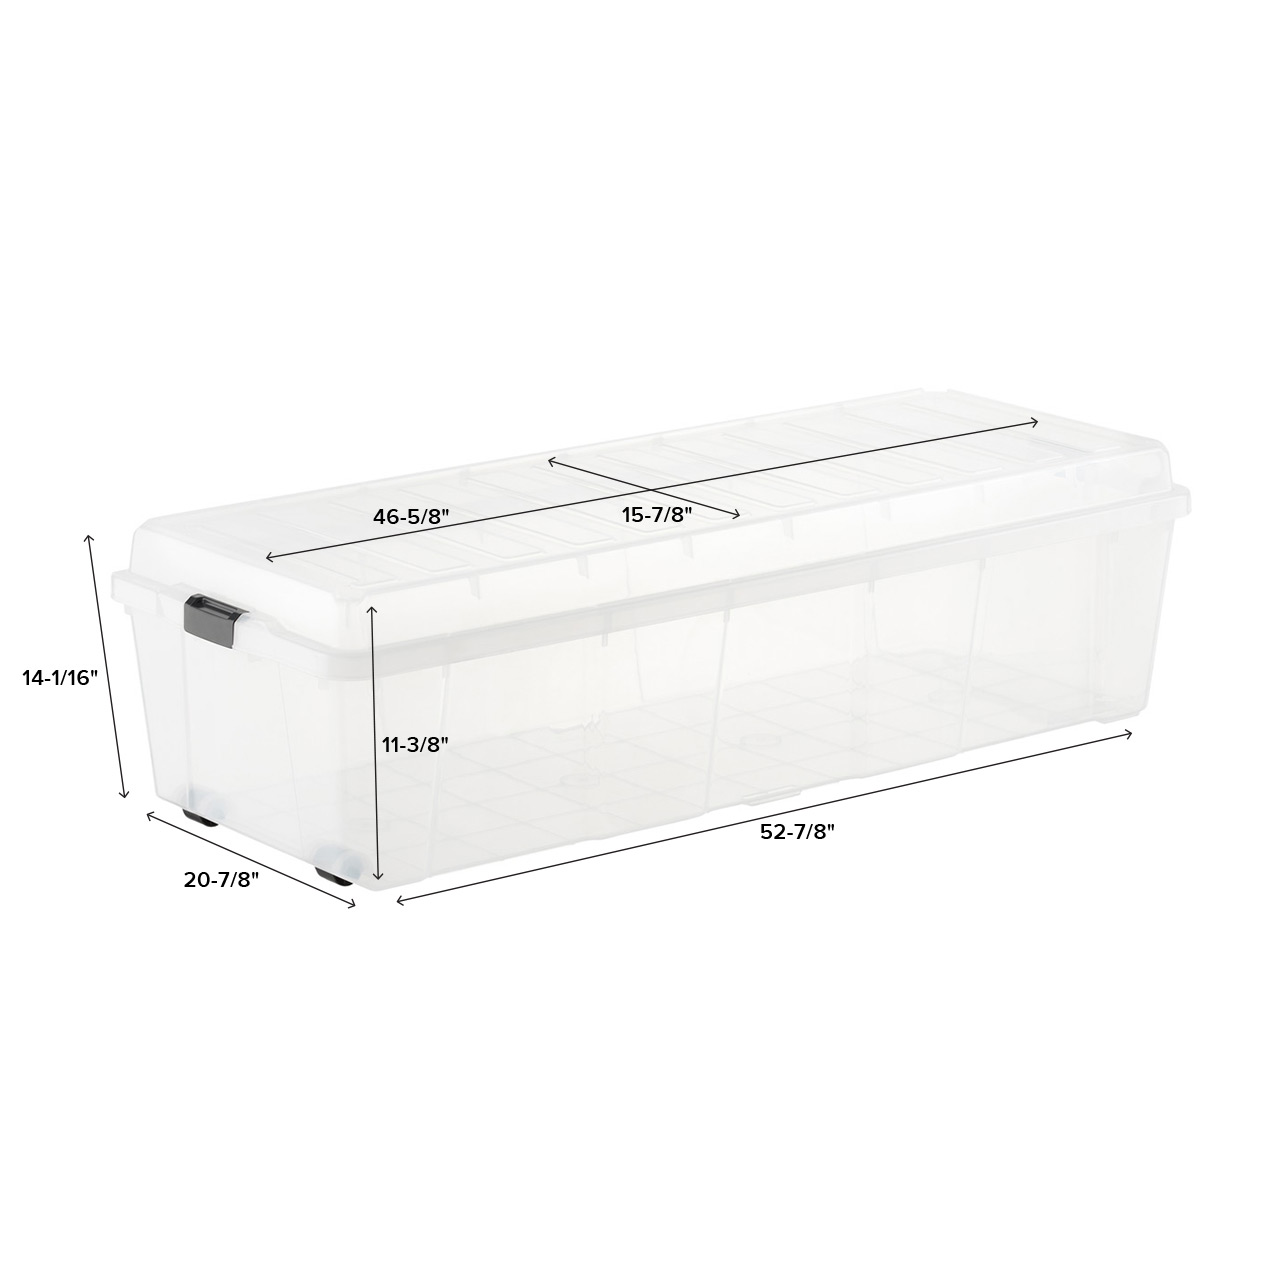 https://www.containerstore.com/catalogimages/411743/10071777-44-Gal-Tote-Storage-Box-DIM.jpg